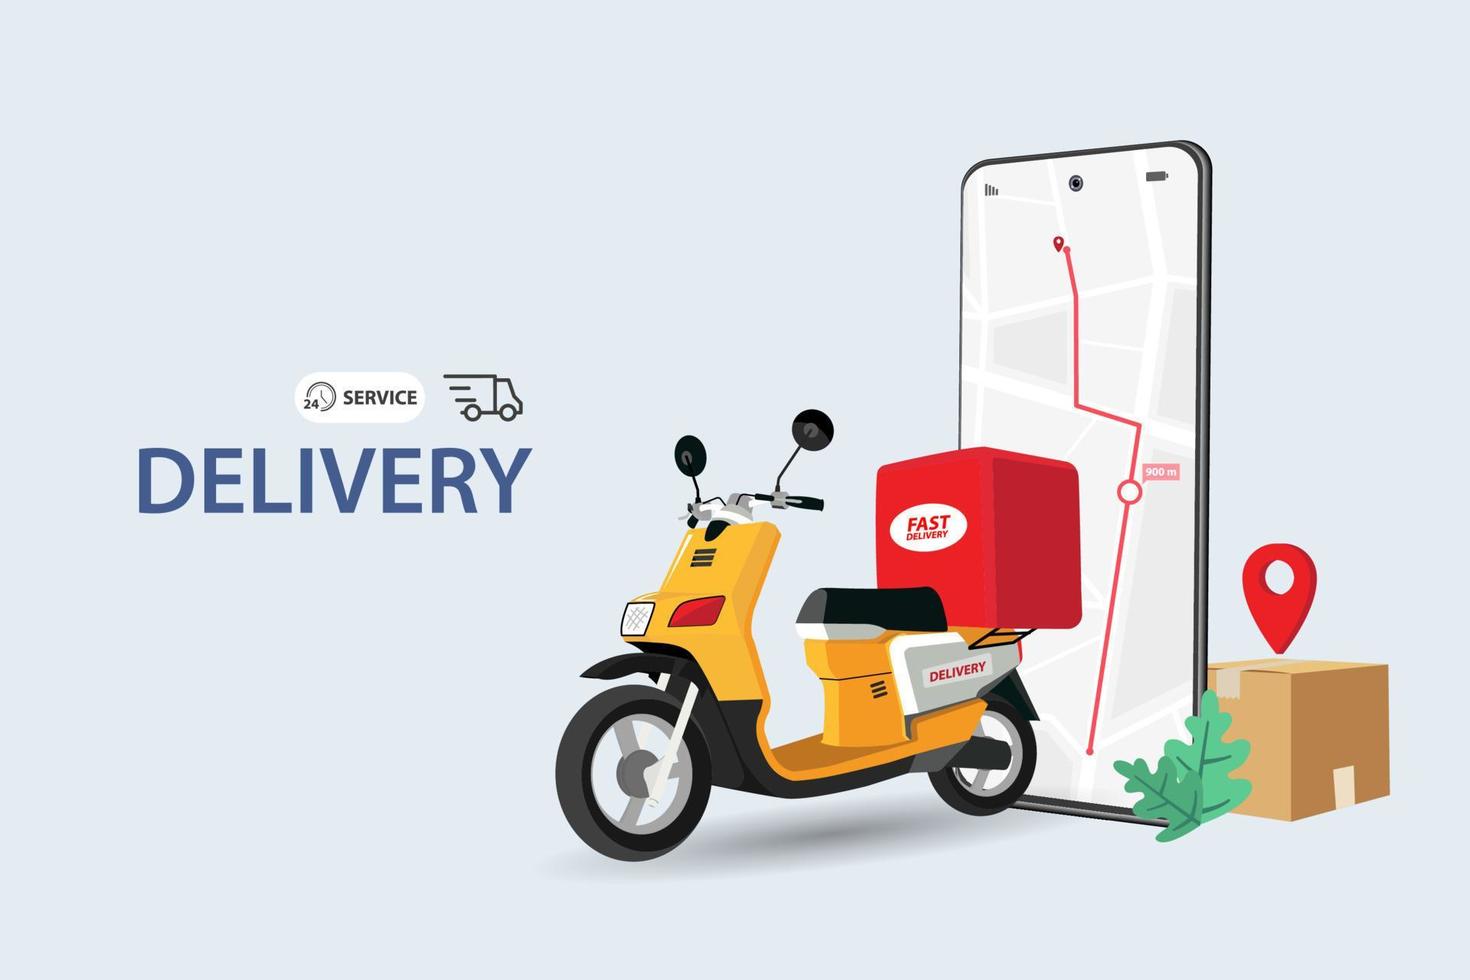 Fast delivery by scooter on mobile. E-commerce concept. Online food order infographic. Webpage, app design. Blue background. Perspective vector